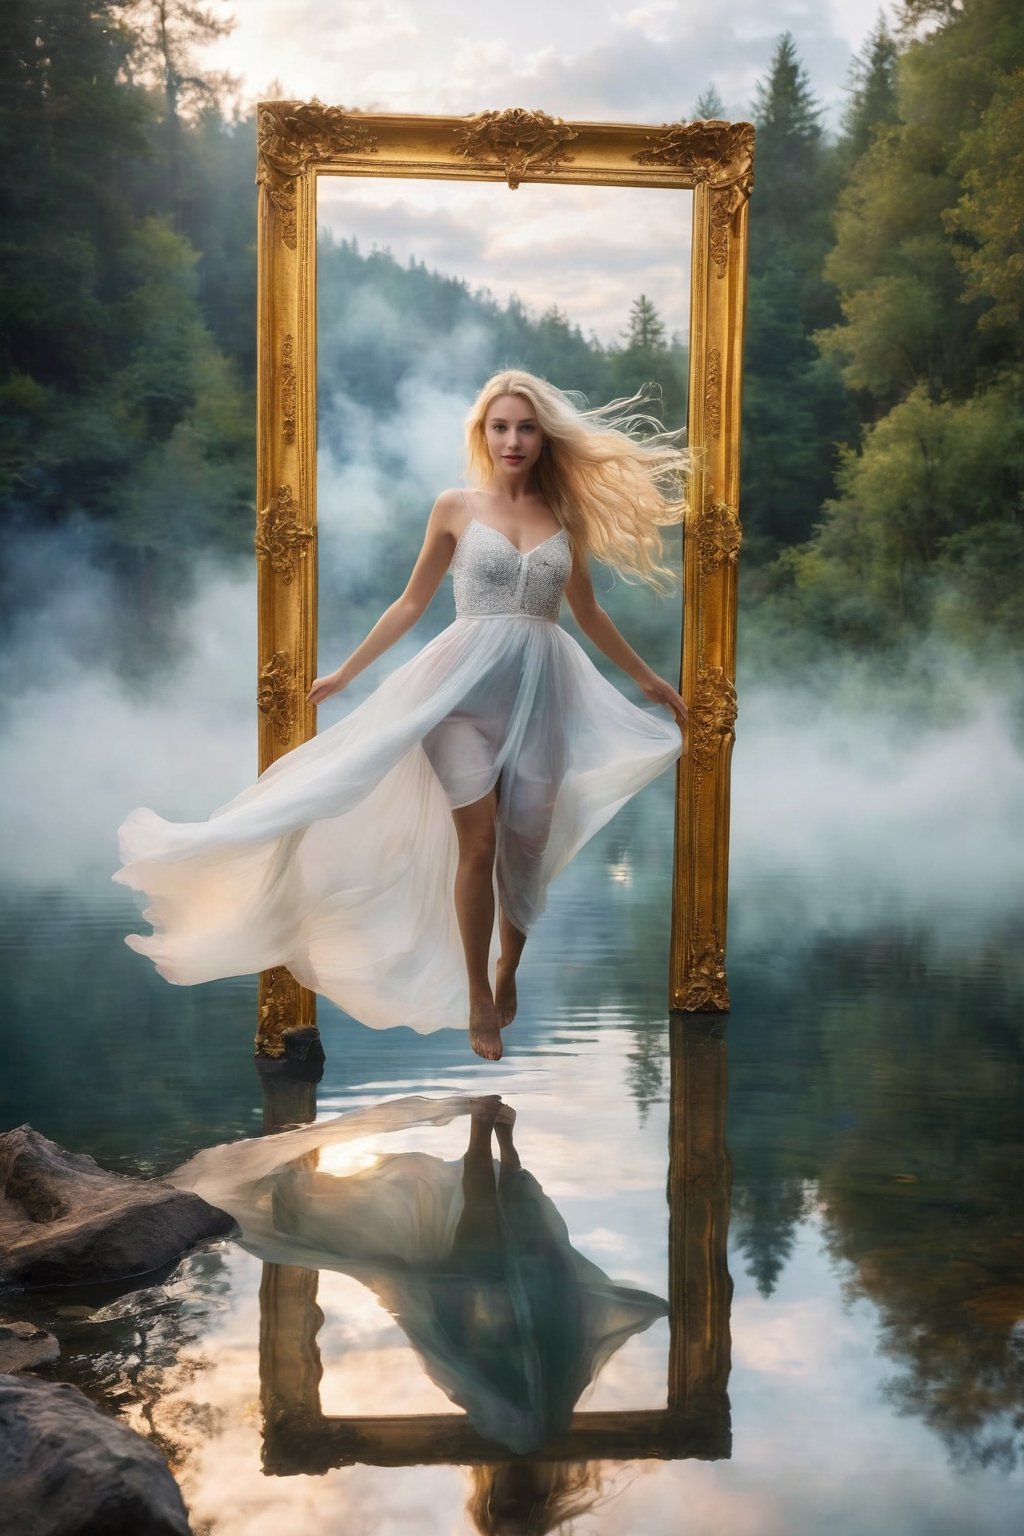 (masterpiece, top quality, super definition, 8K), crisp image, fantasy, wonderful, large rectangular mirror in center of flaming background, frame decorated with gold, beautiful girl in white emerging from mirror, perfect proportions, smiling woman, long beautifully tied blonde hair, she is jumping out of mirror, inside mirror reflects foggy forest and lake, soft focus, 3 point lighting, white foggy background, center crop, ,hubgwomen